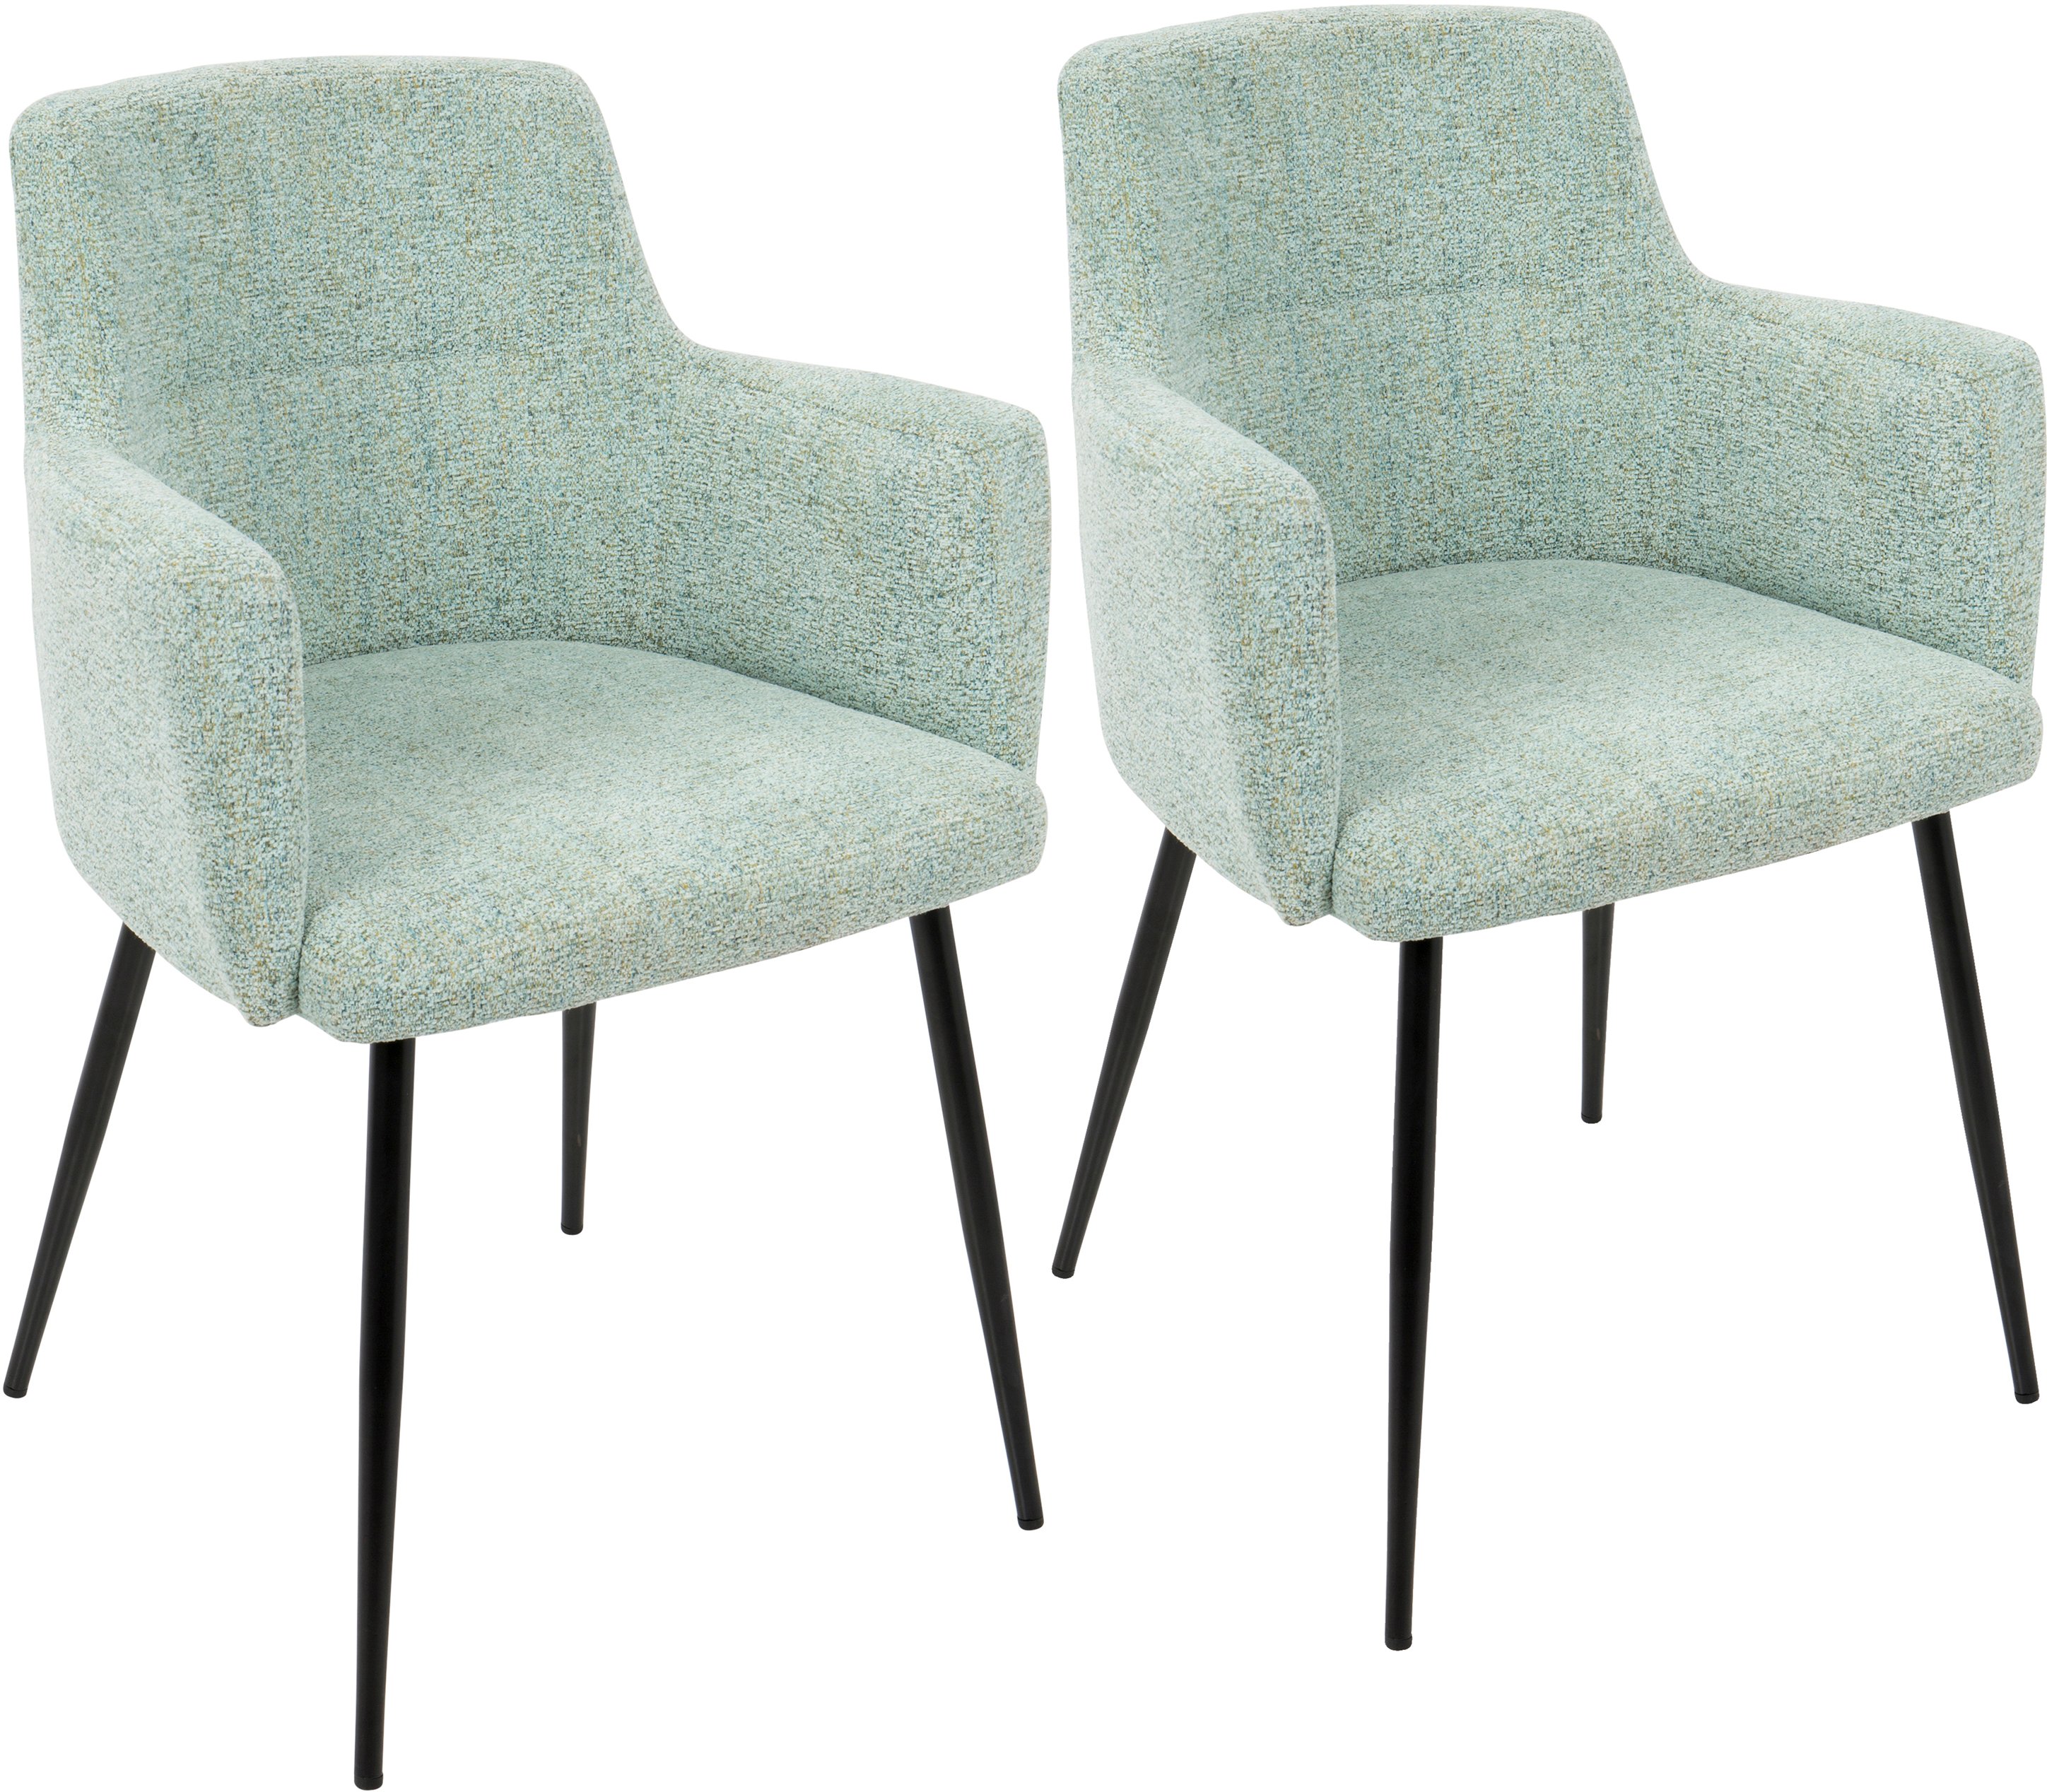 Best Ing Contemporary Green And, Green Upholstered Dining Room Chairs